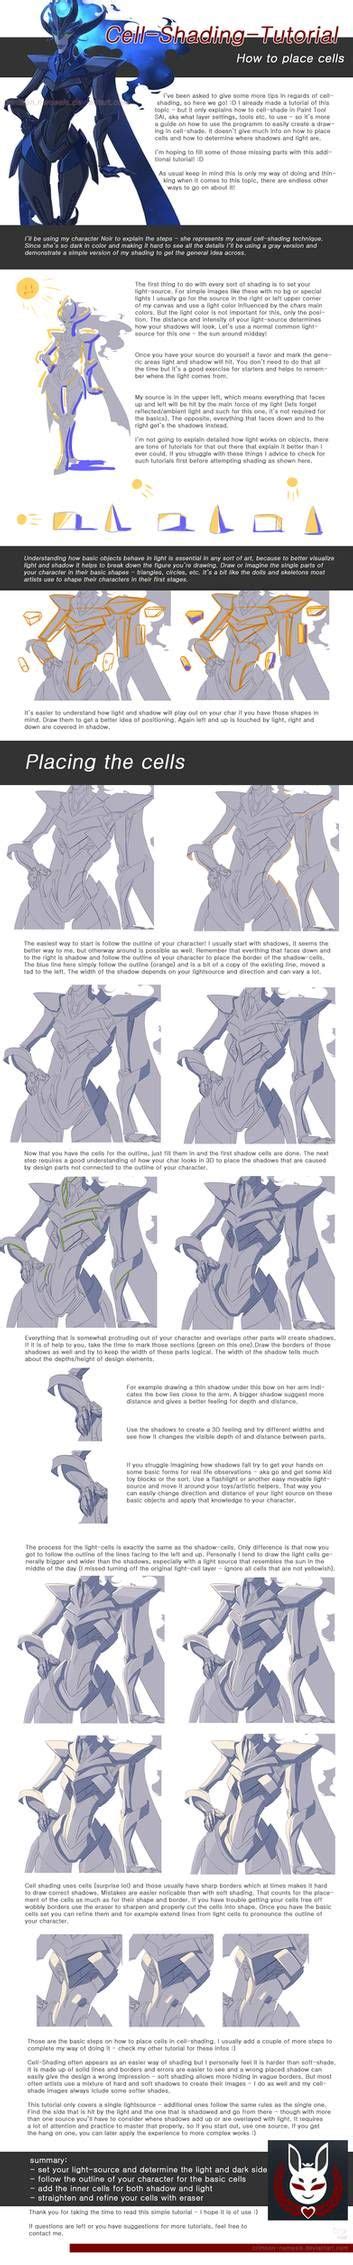 Basic Cell Shading Tutorial 2 Placing Cells By Crimson Nemesis On